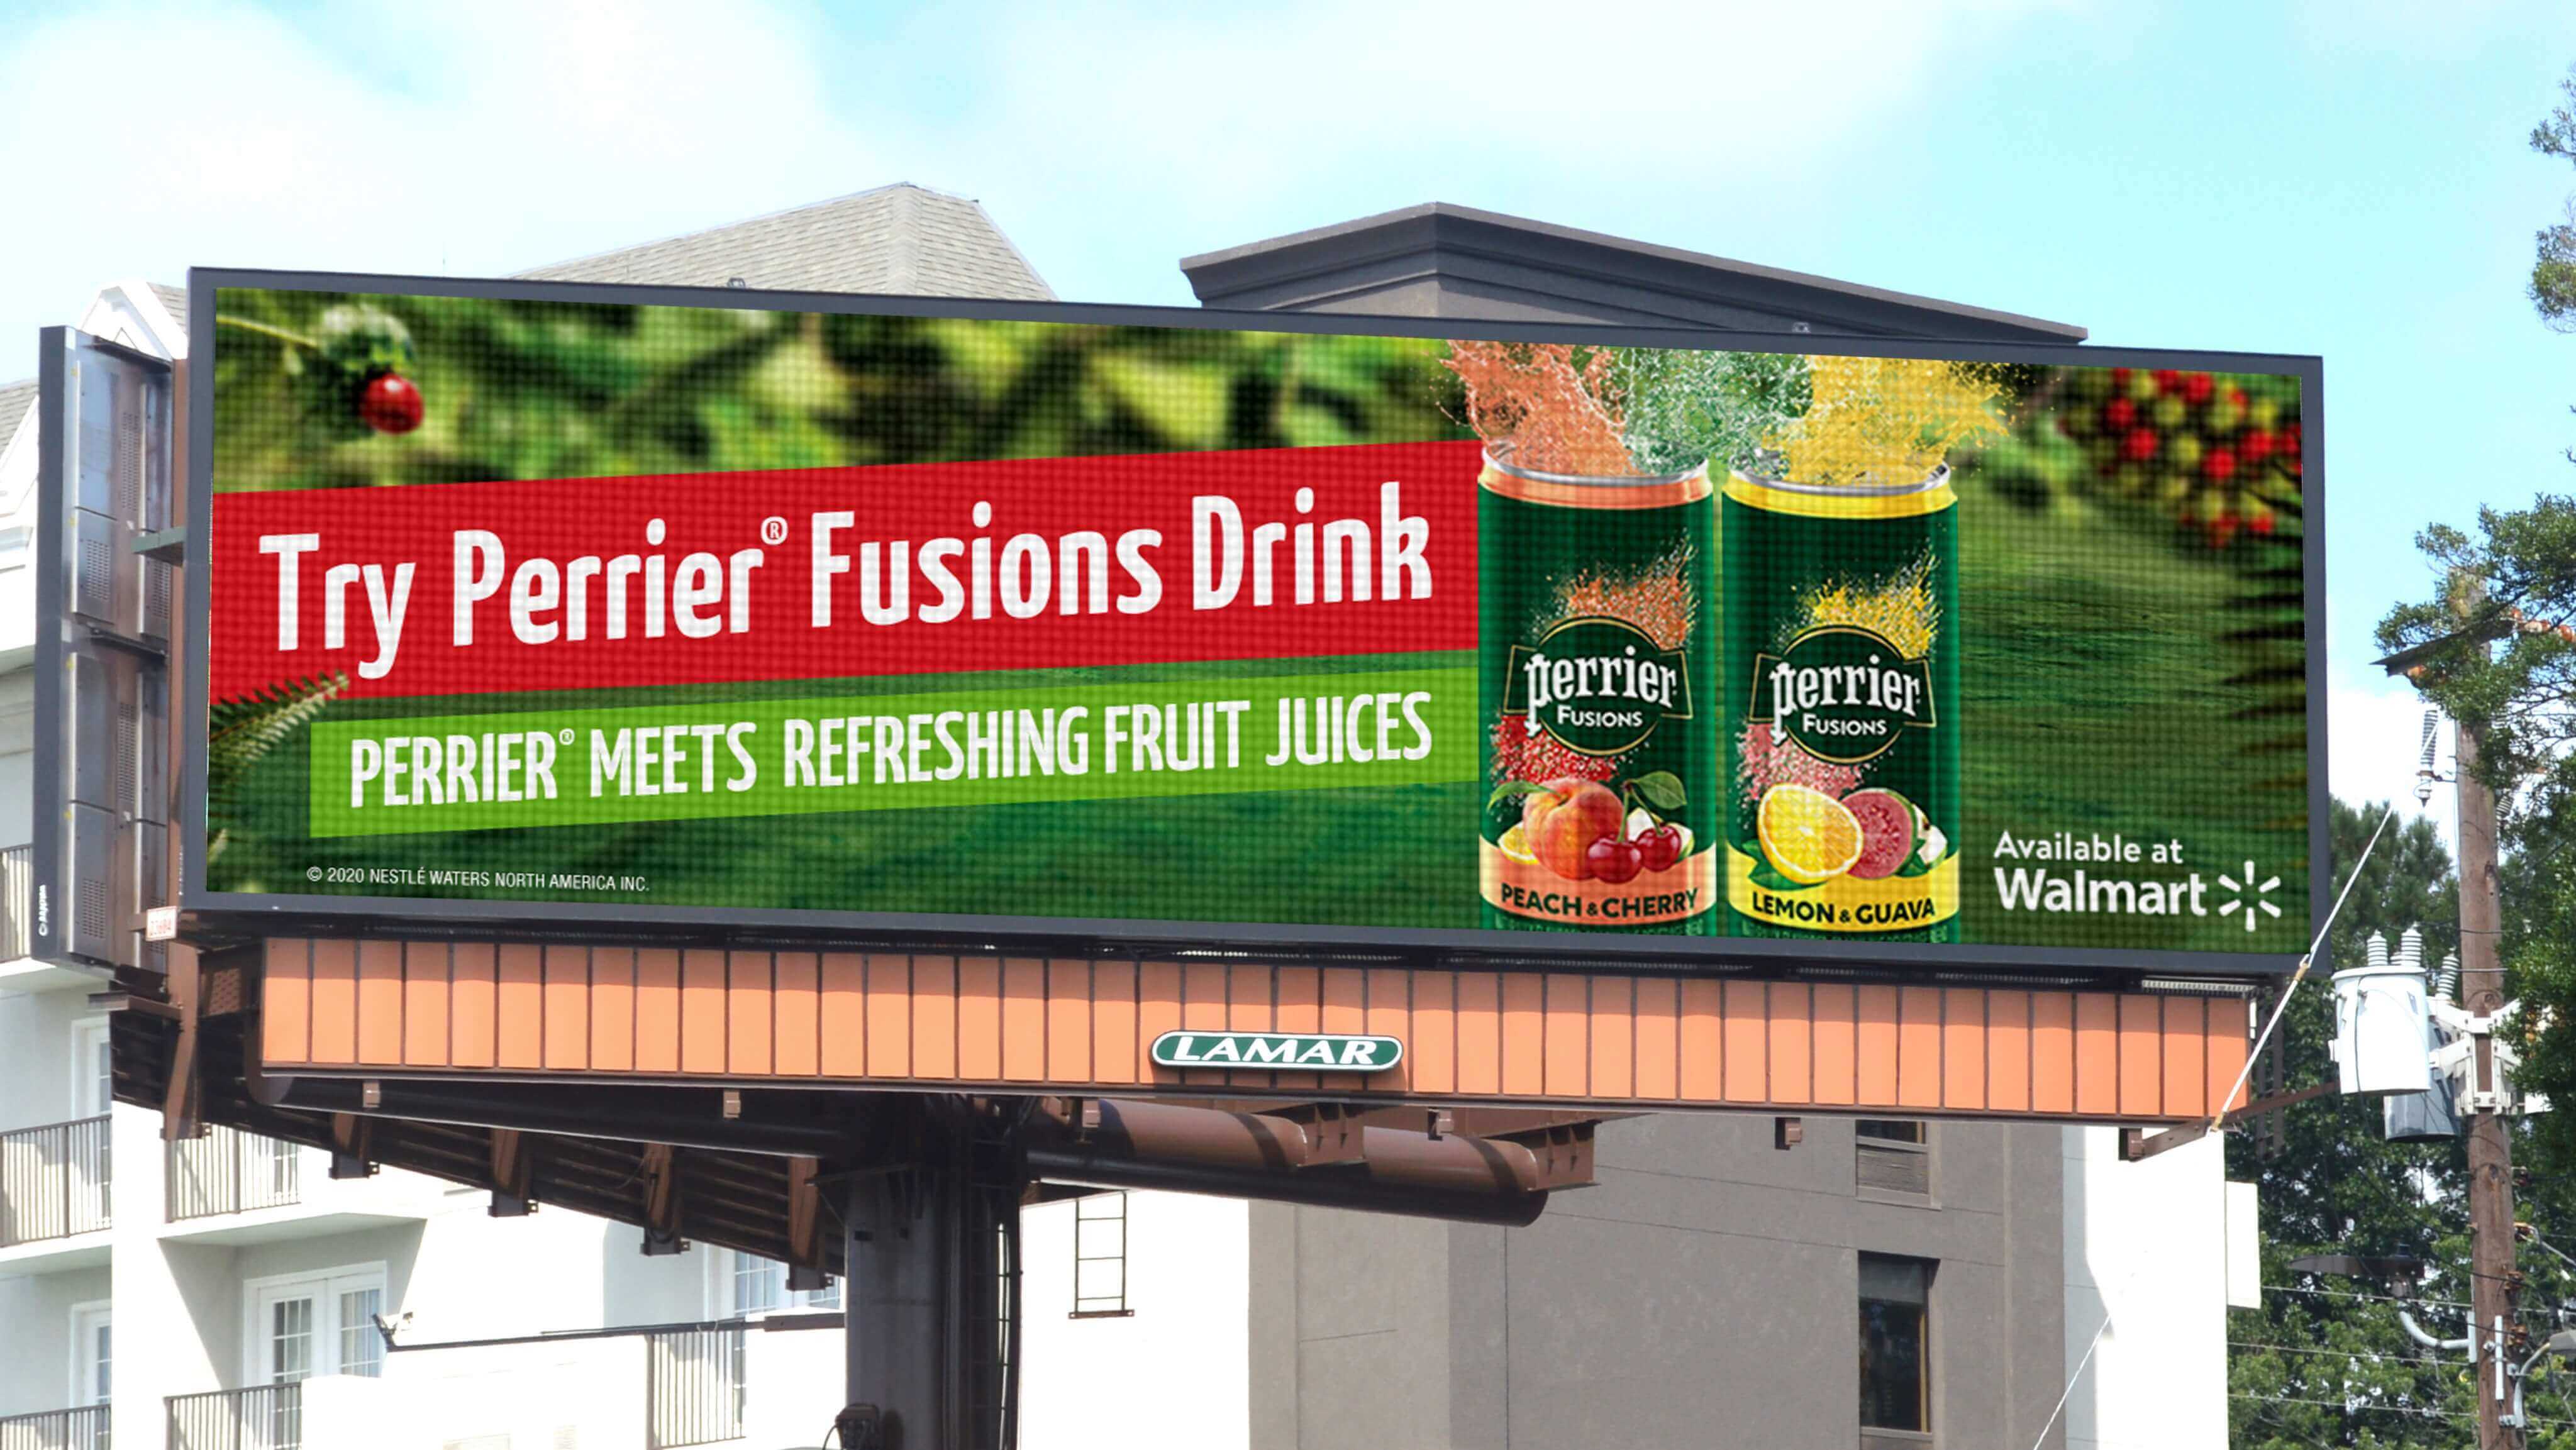 Lamar billboard with Nestlé Perrier Fusions advertisement